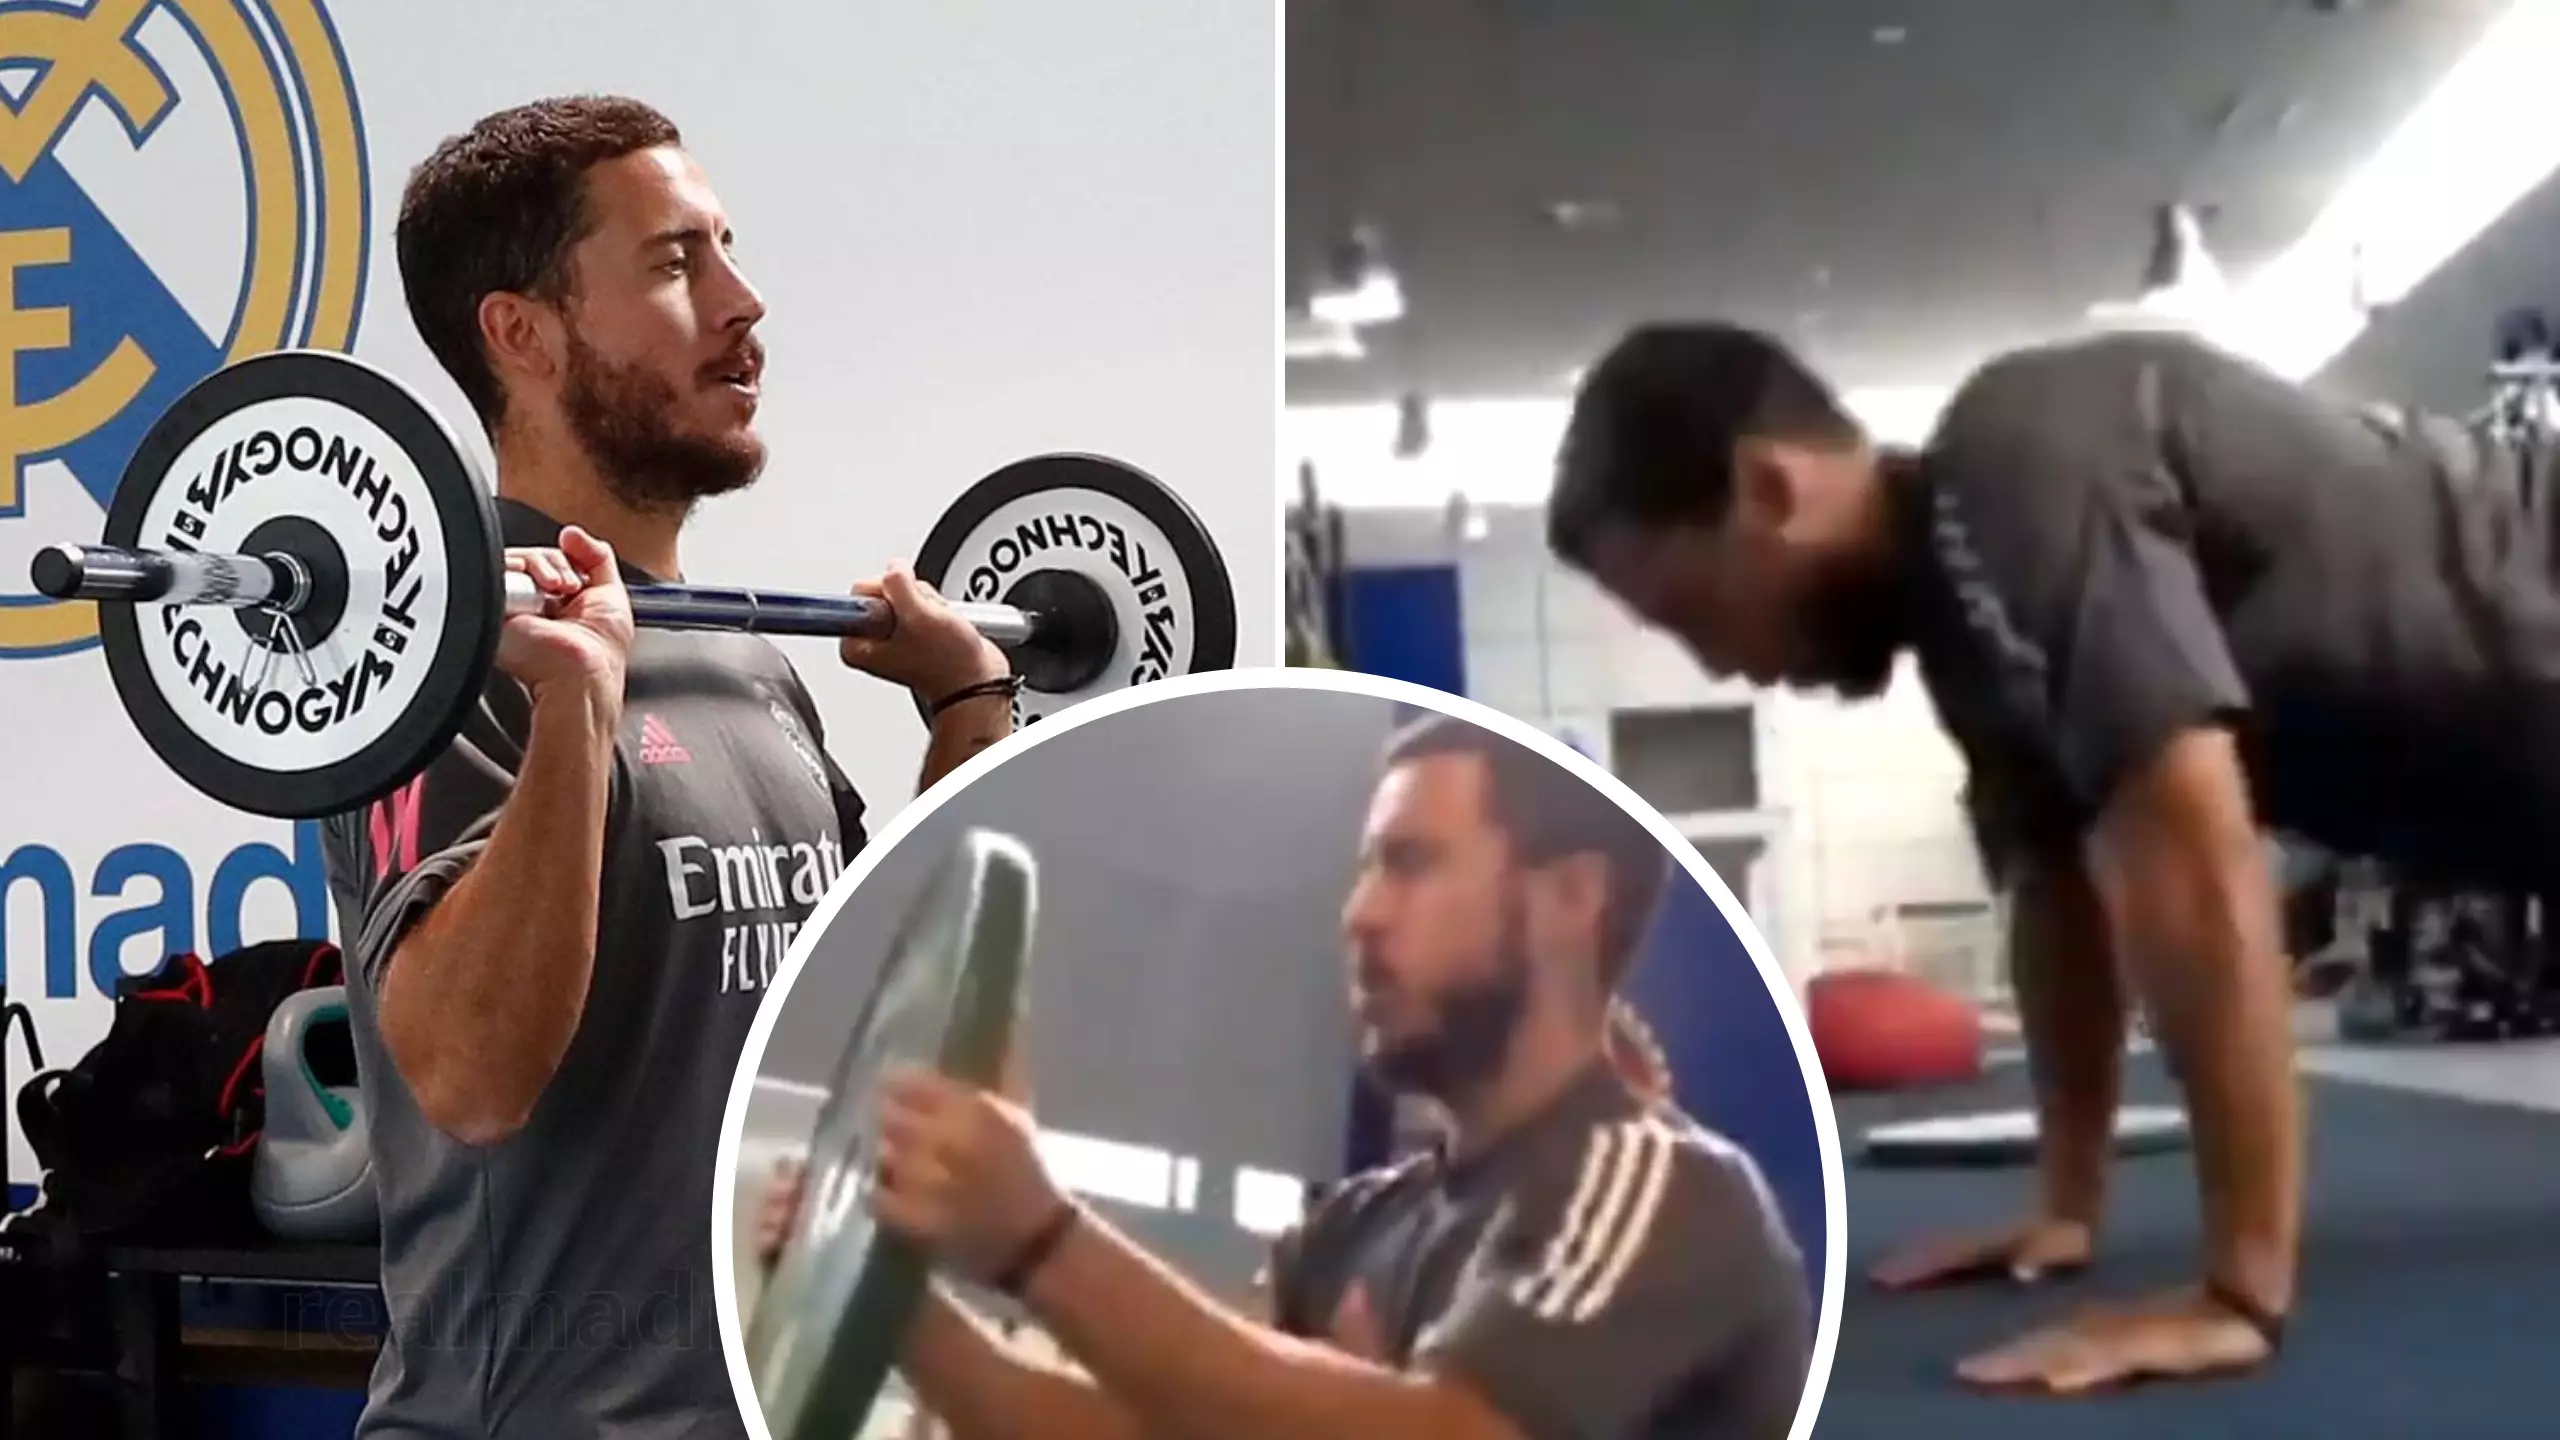 Eden Hazard Hits Back At 'Overweight' Claims With Intense Training Video